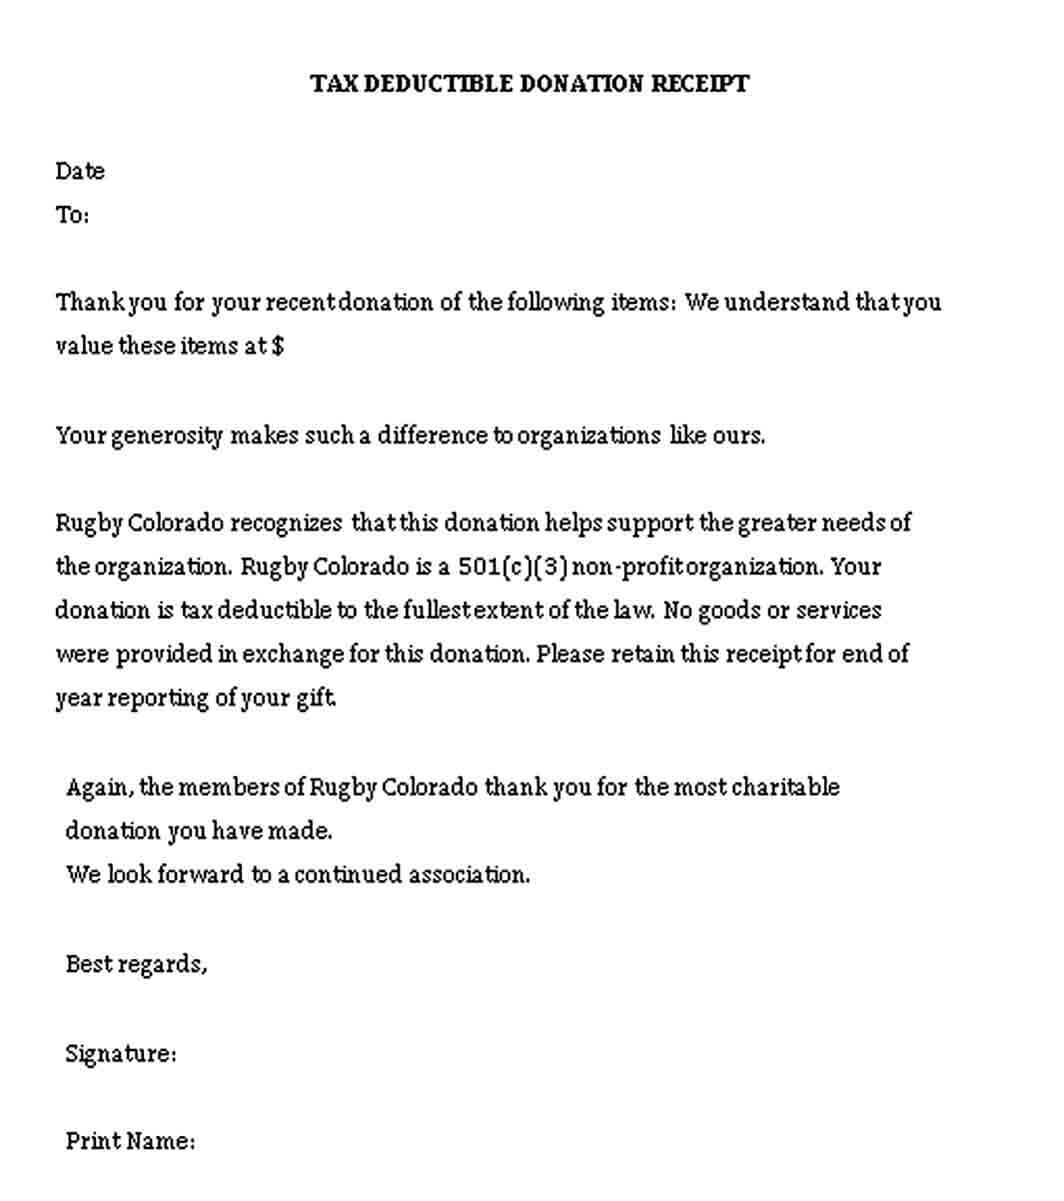 Tax Deductible Donation Receipt MS Word Free Download